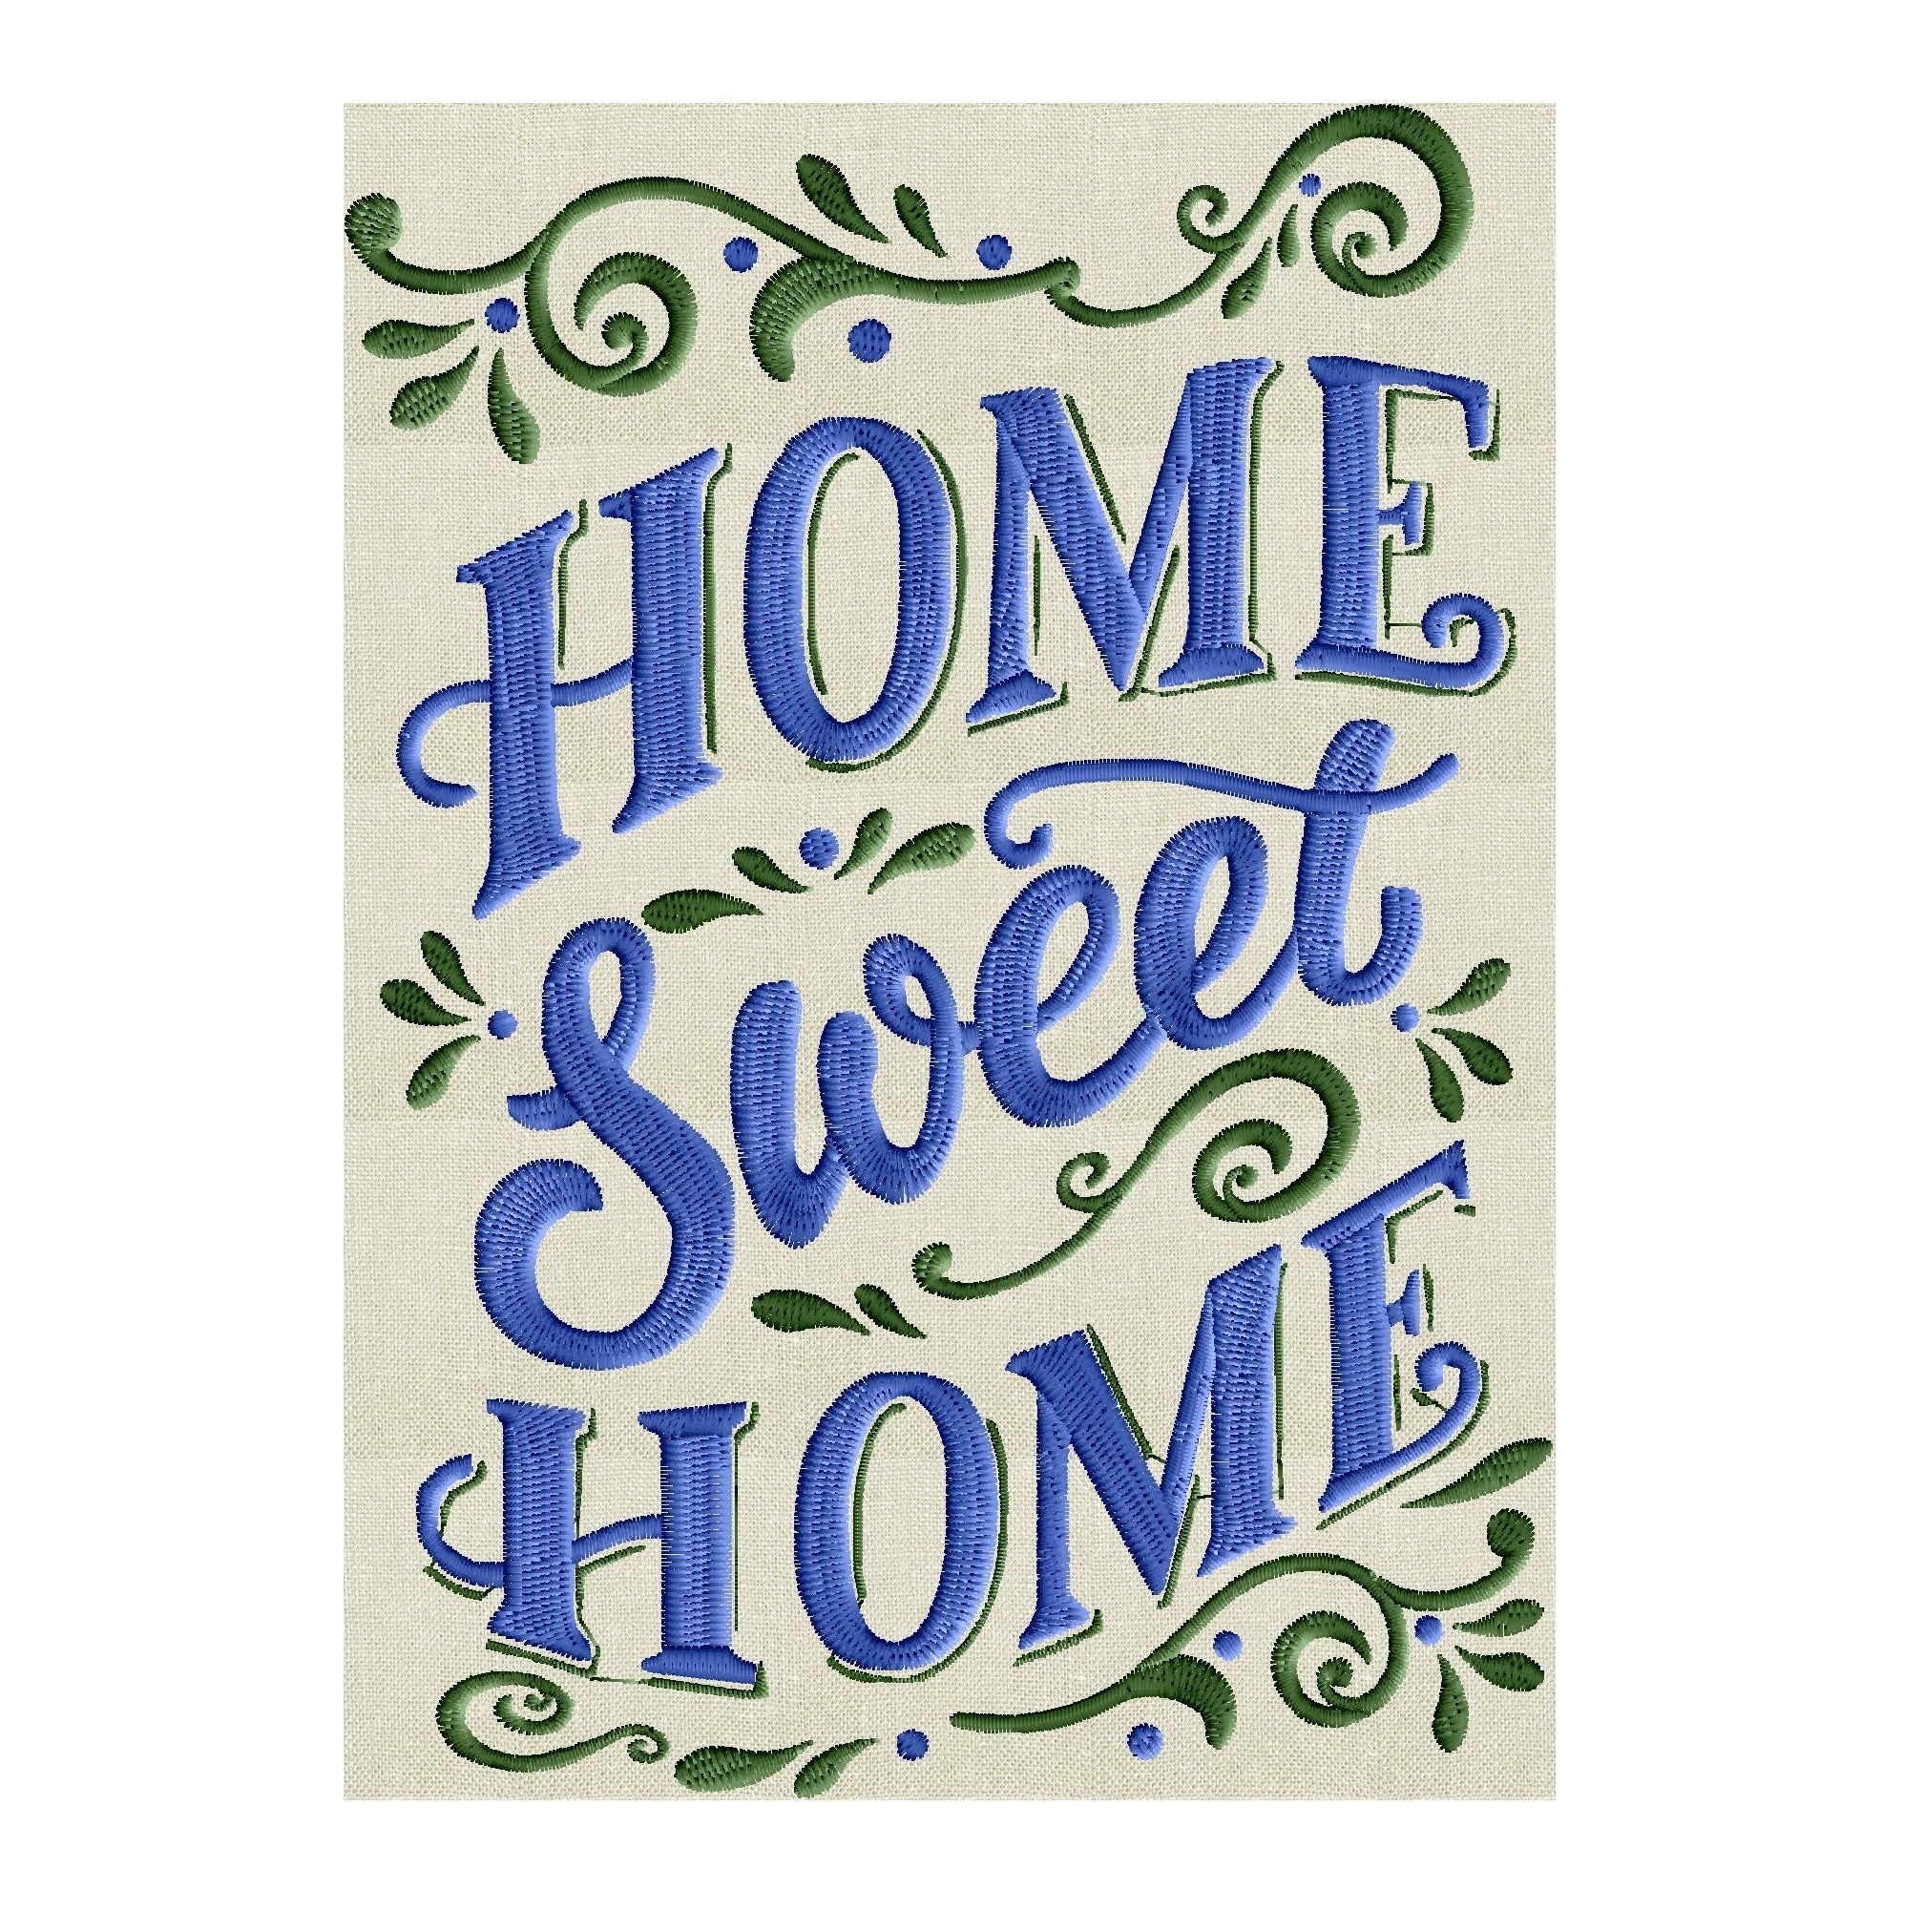 Home Quote "Home Sweet Home" Chalk Farm style EMBROIDERY DESIGN FILE - Instant download - Dst Hus Jef Pes Vp3 Exp formats 2 colors & 2 sizes